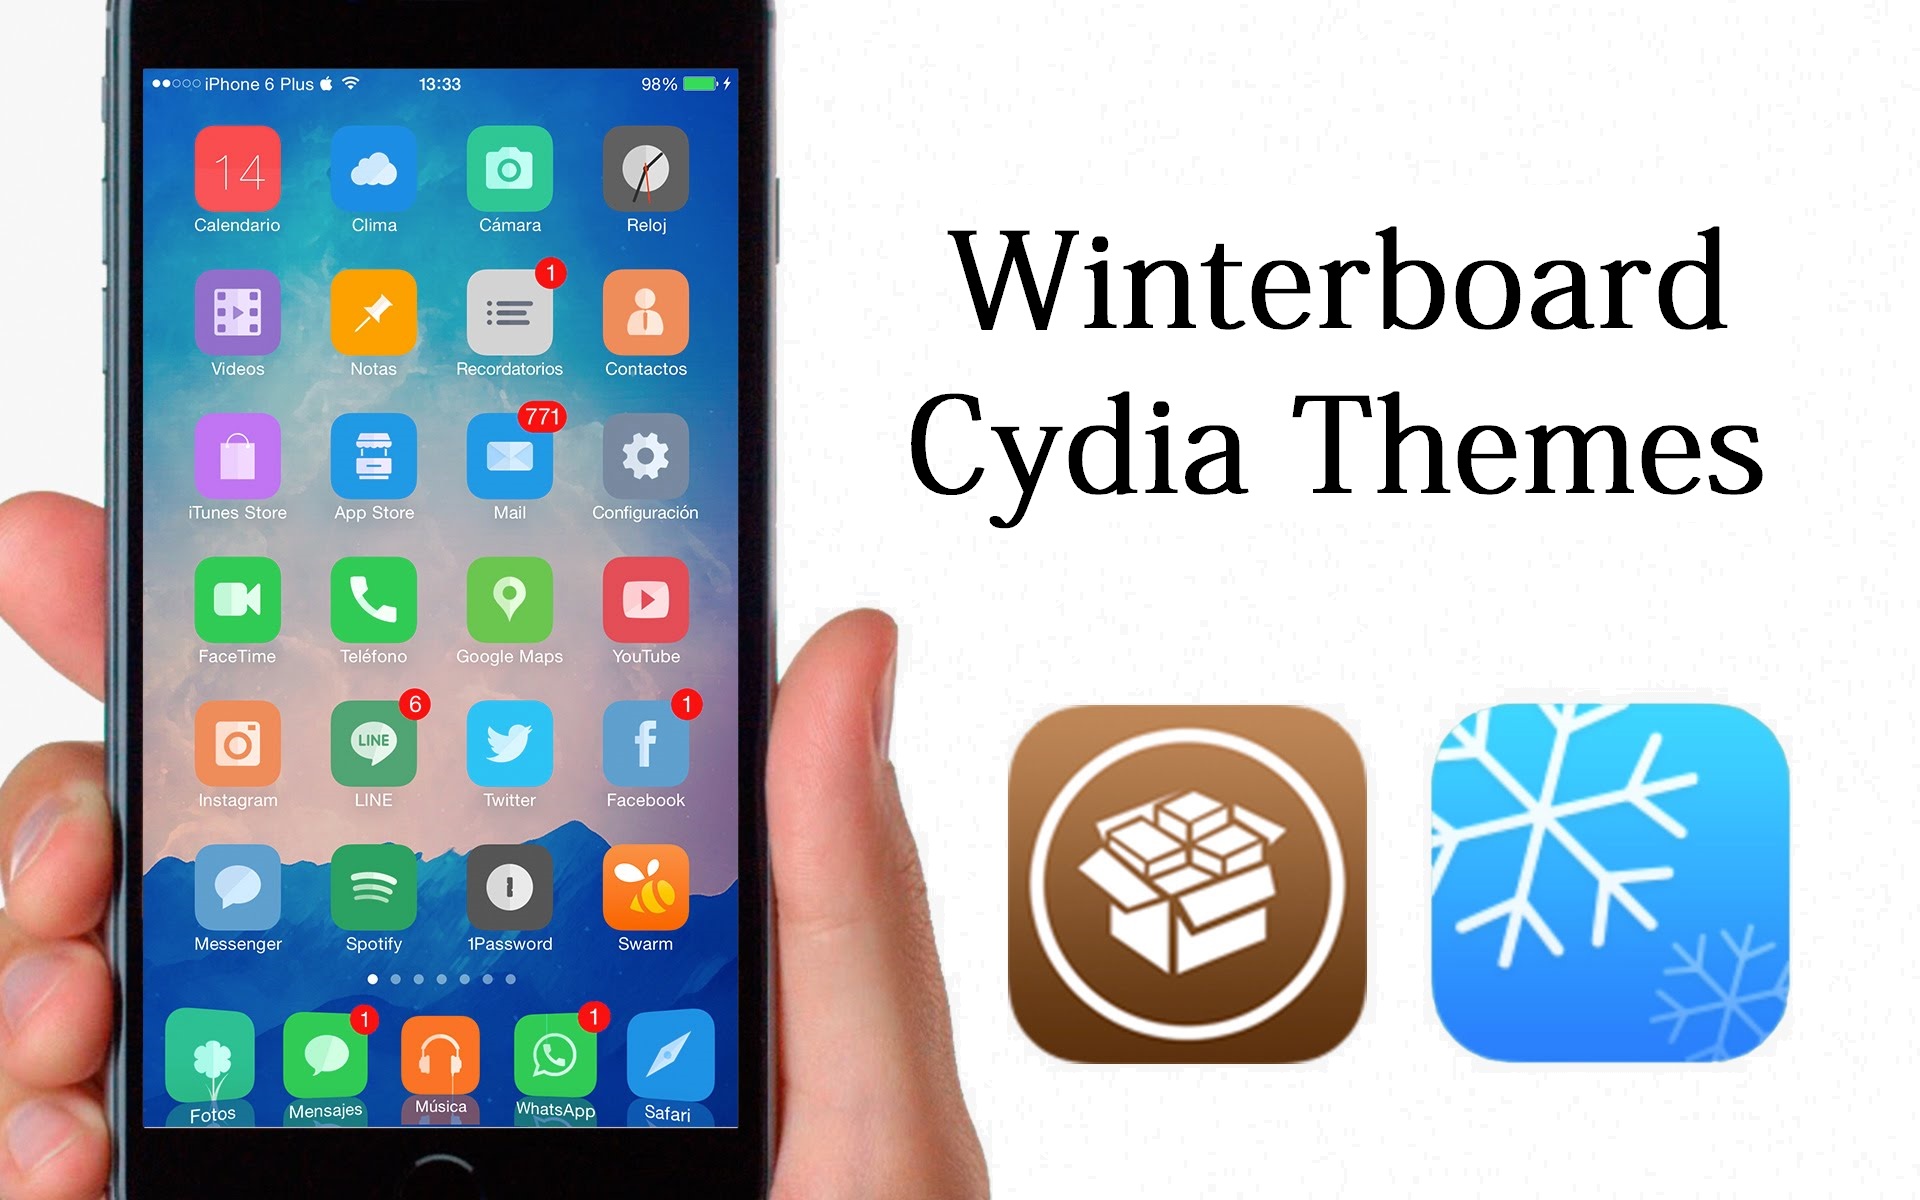 Download Cydia Apps And Sources